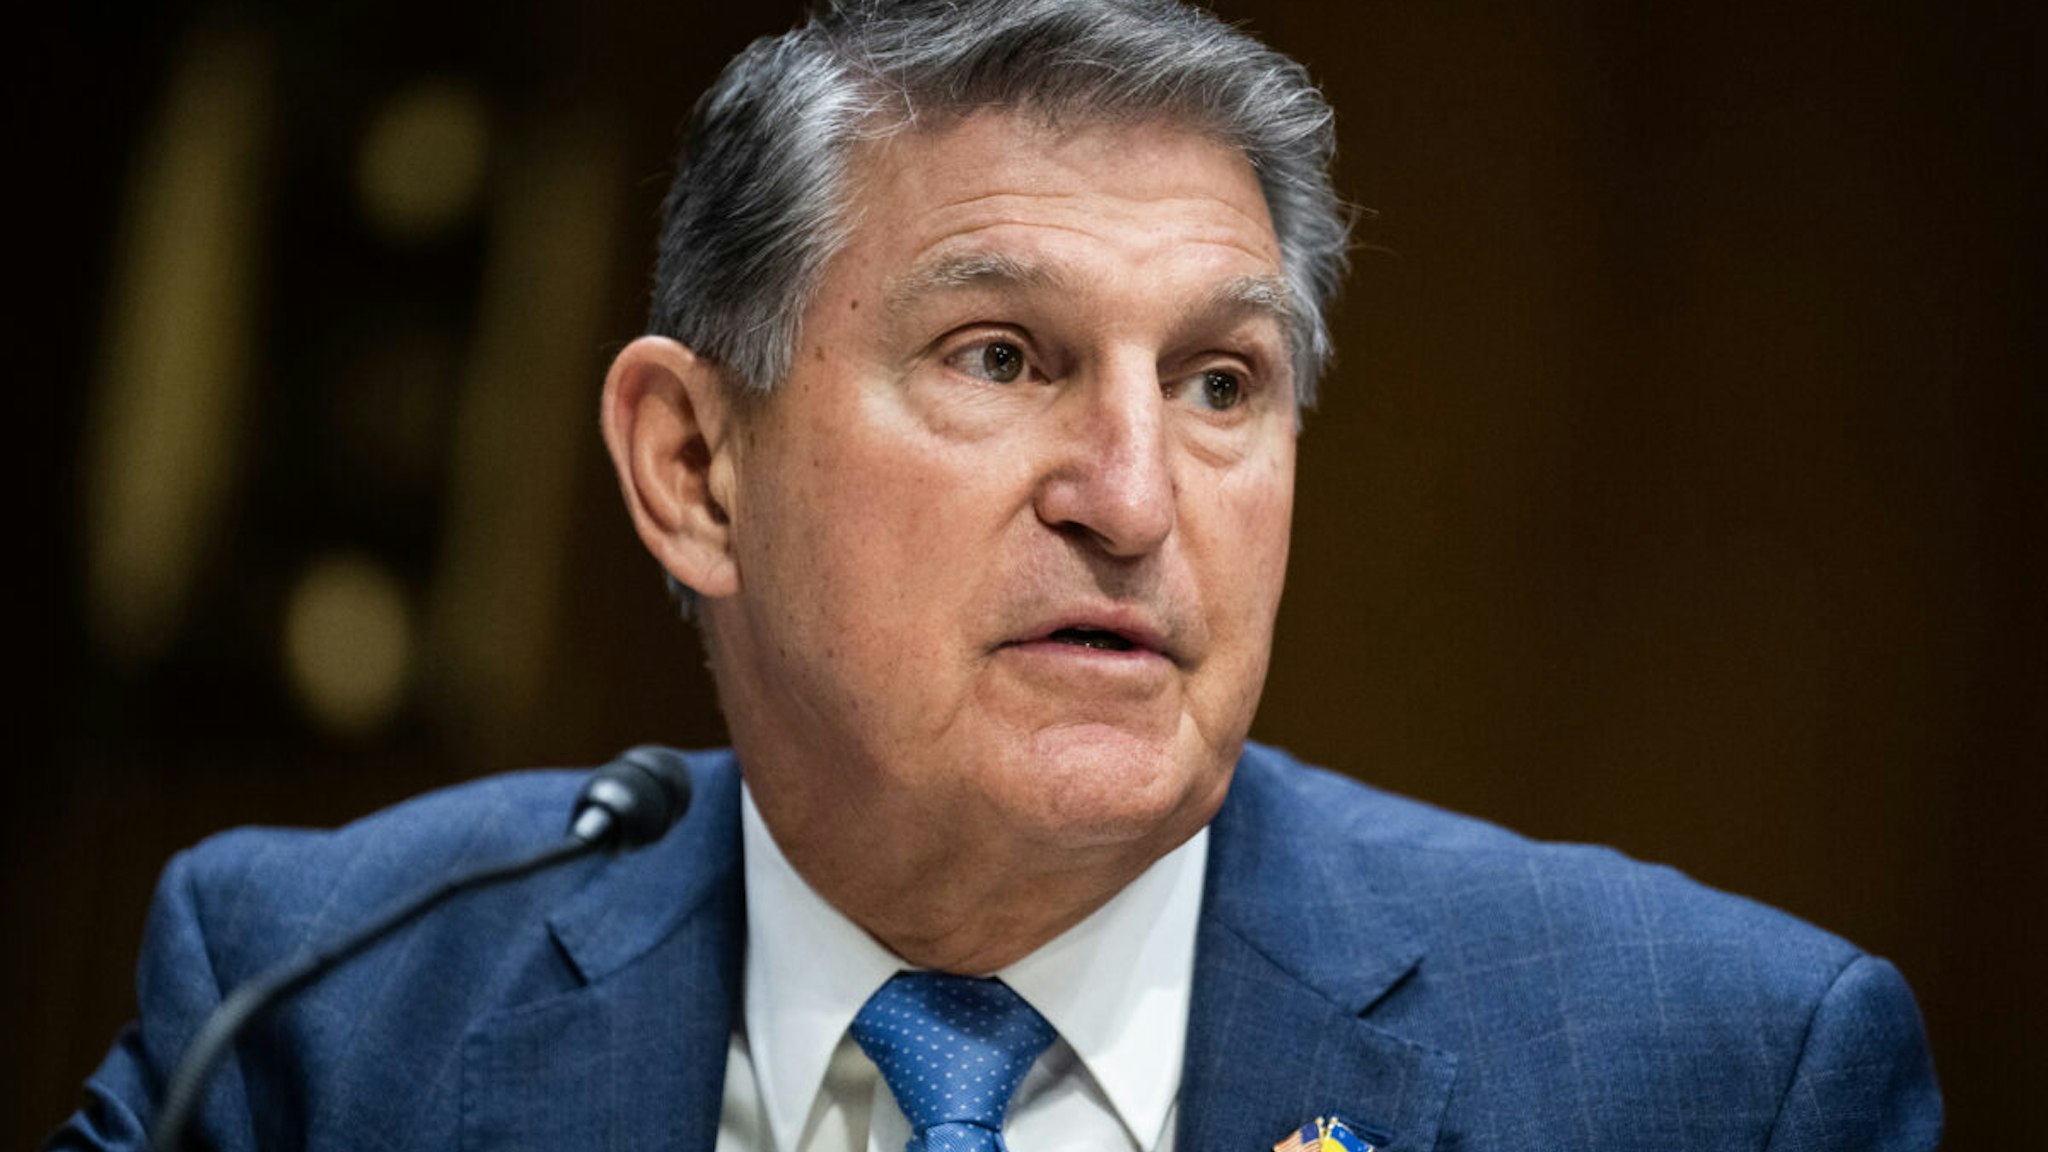 Sen. Joe Manchin, D-W.Va., speaks during the Senate Appropriations Committee markup of the "Military Construction, Veterans Affairs, and Related Agencies Appropriations Act, 2024," and the "Agriculture, Rural Development, Food and Drug Administration, and Related Agencies Appropriations Act, 2024," in Dirksen Building on Thursday, June 22, 2023.